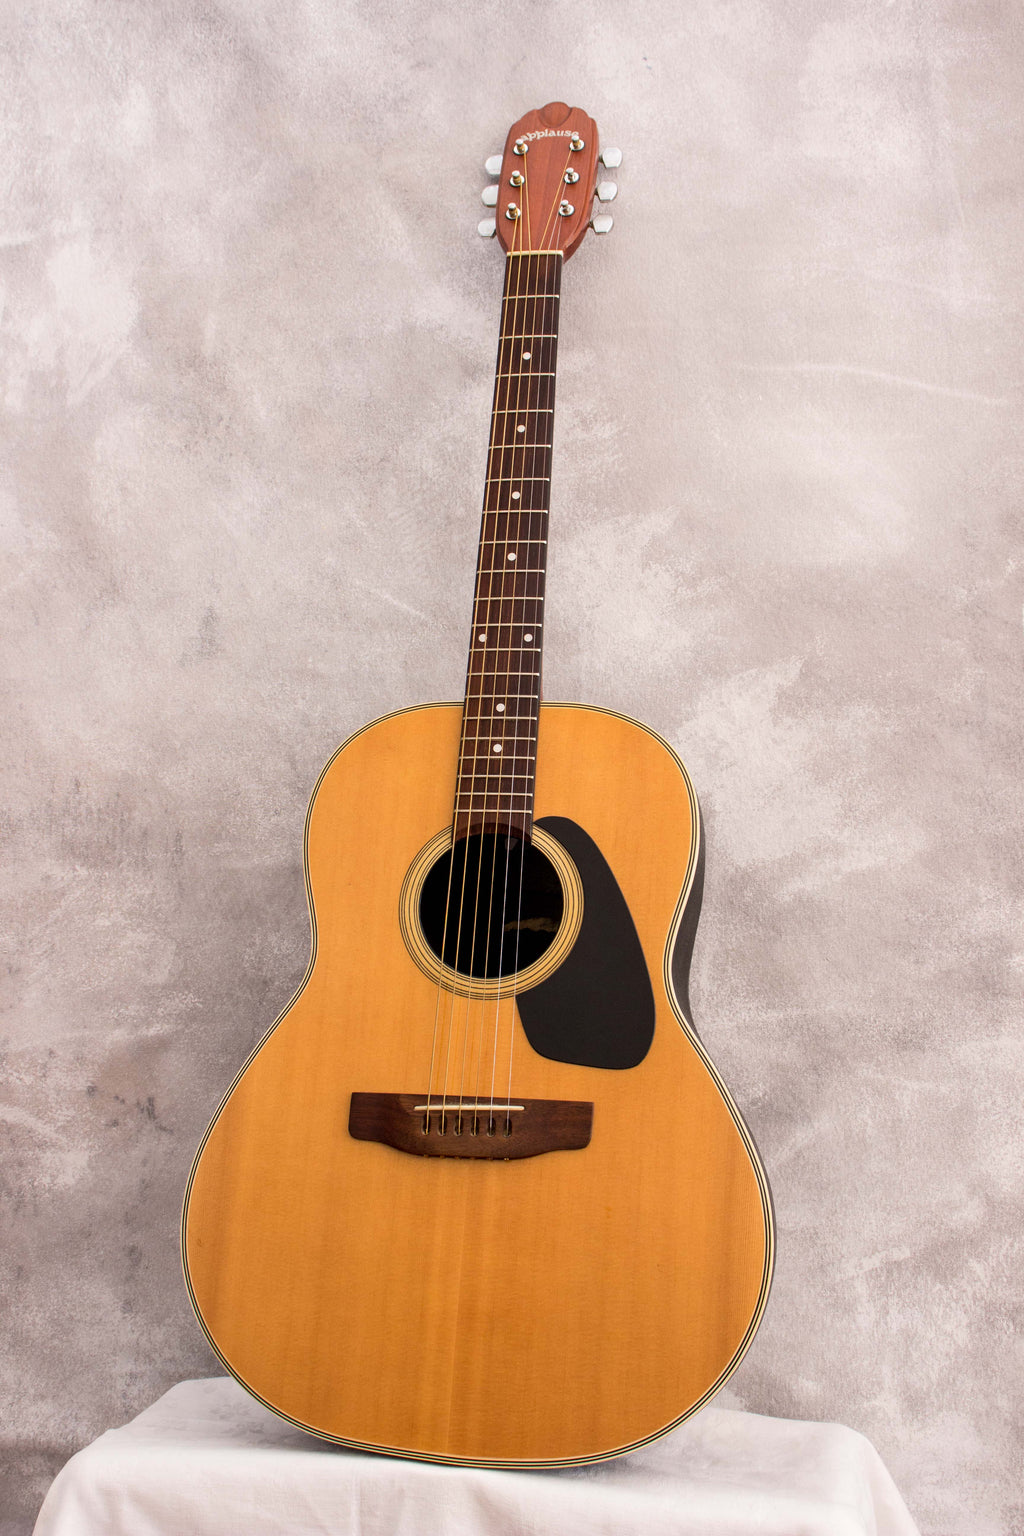 Applause by Ovation AA14 Roundback Acoustic 1970s